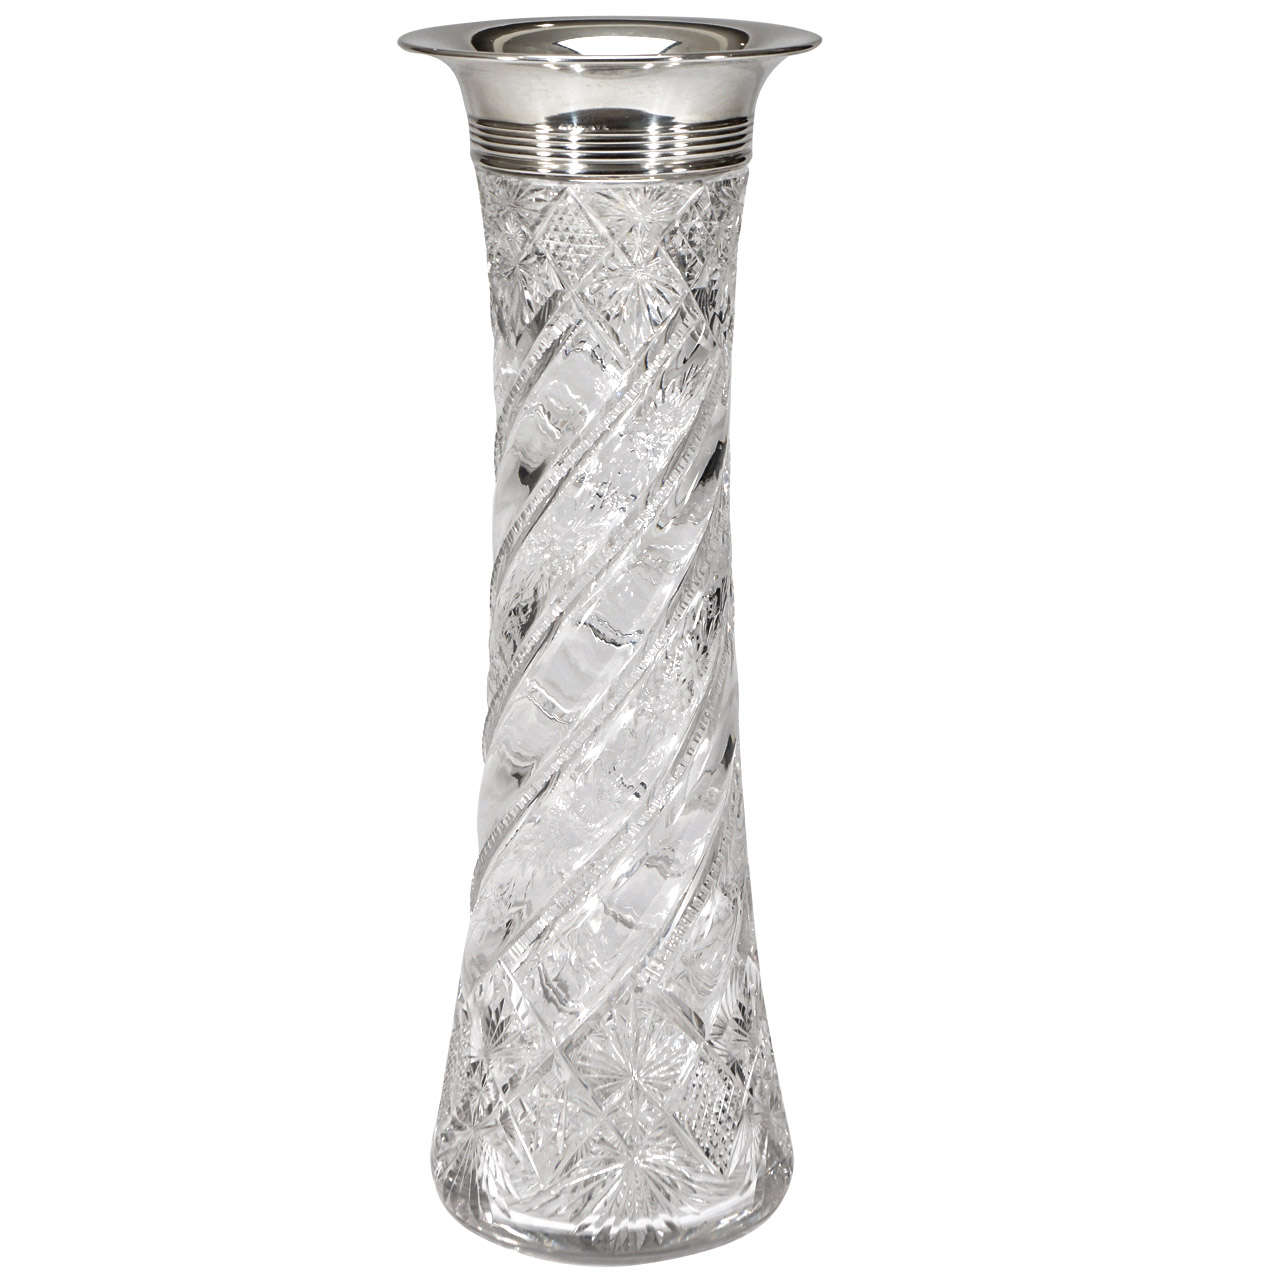 Monumental ABP Crystal Vase with Wheel-Cutting & Sterling Mount